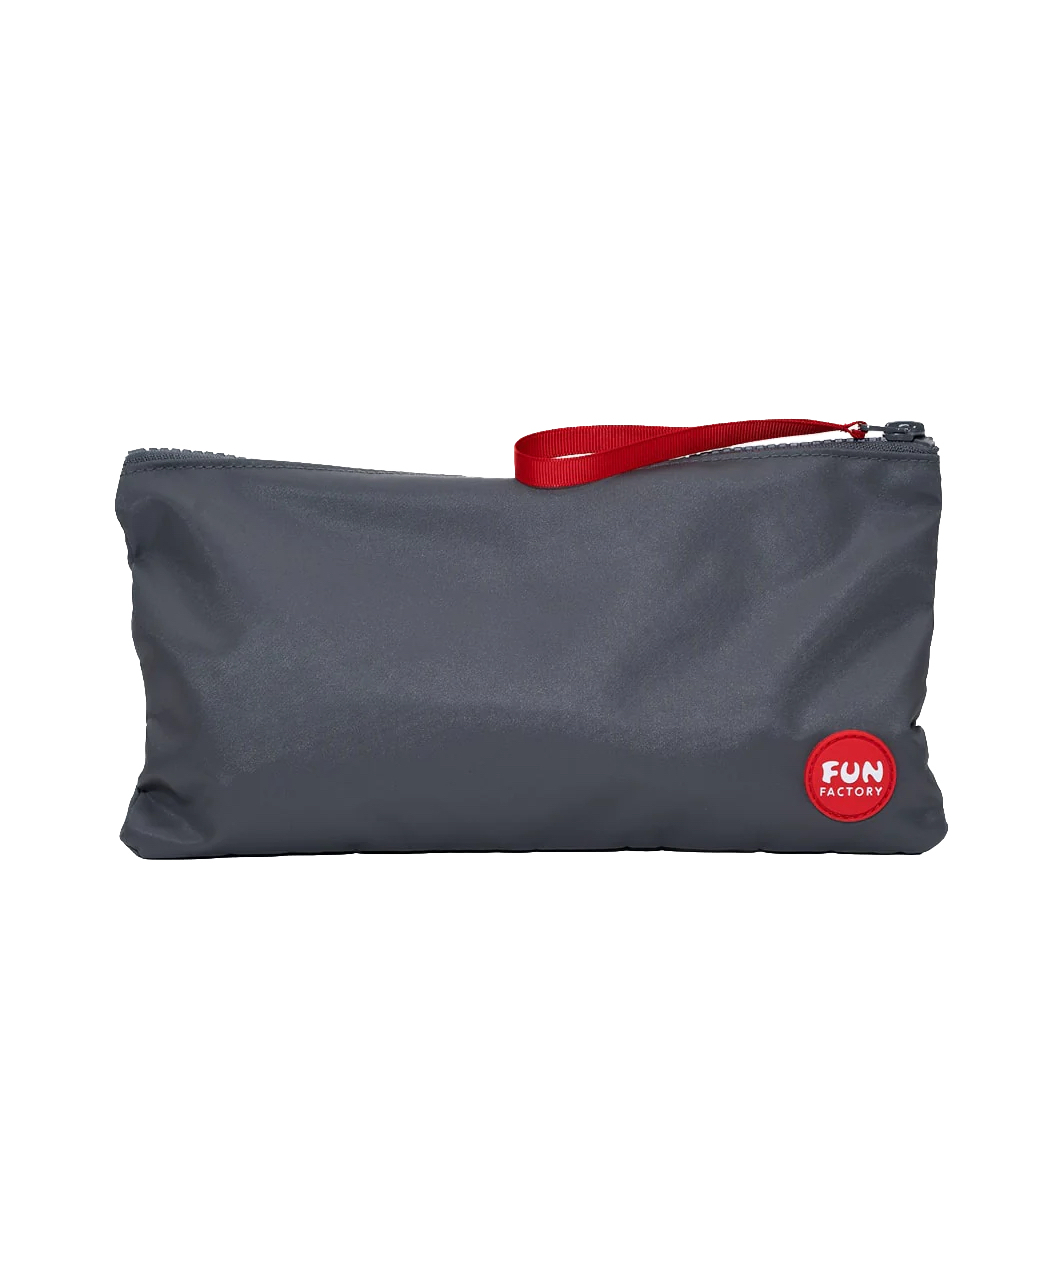 Fun Factory Charcoal Toybag